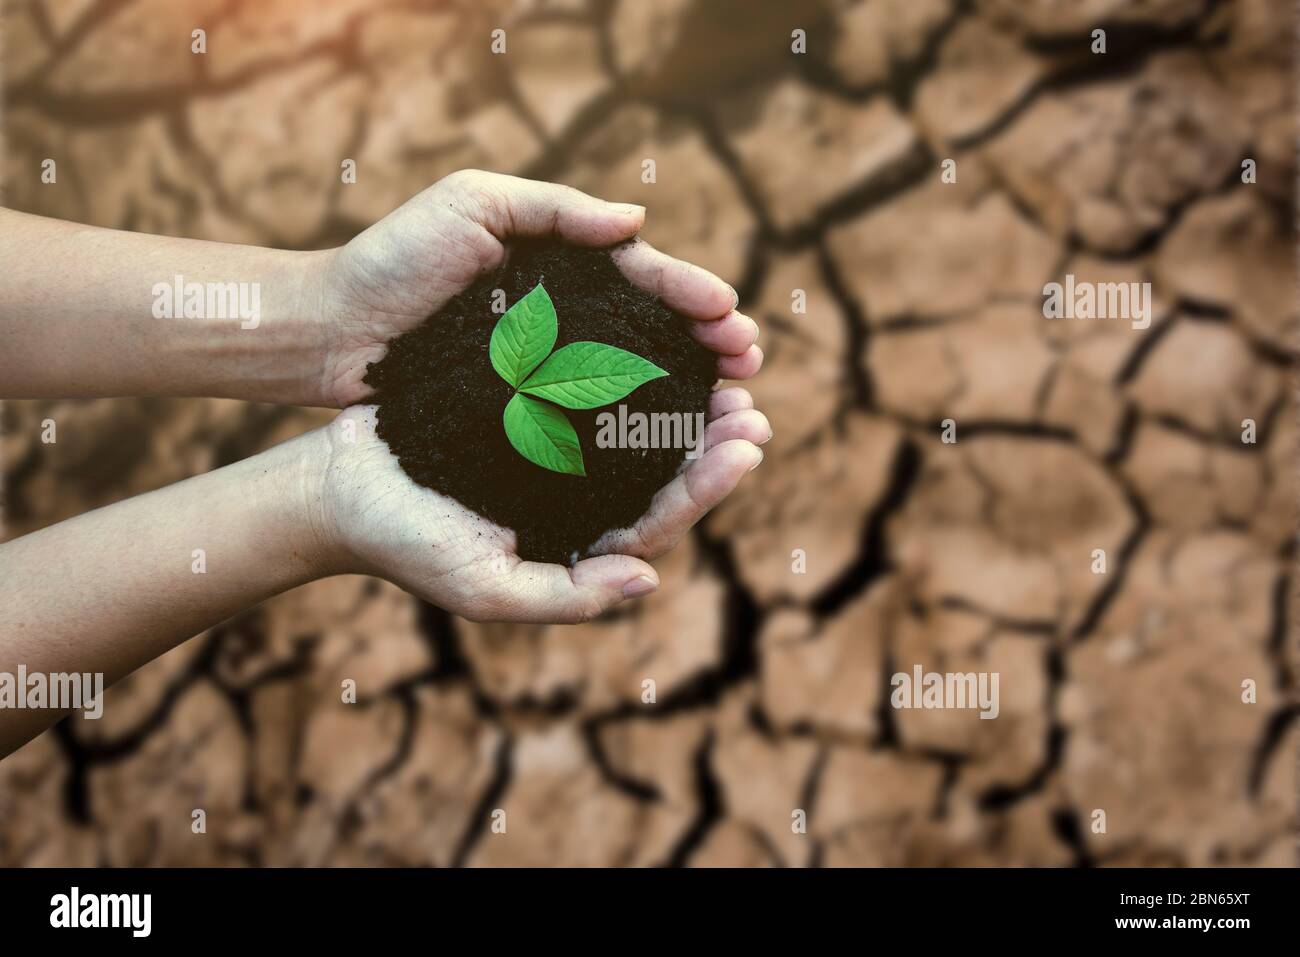 Top view hands holding tree growing on cracked earth. Saving environment and natural conservation concept with tree planing on green globe earth. Stock Photo